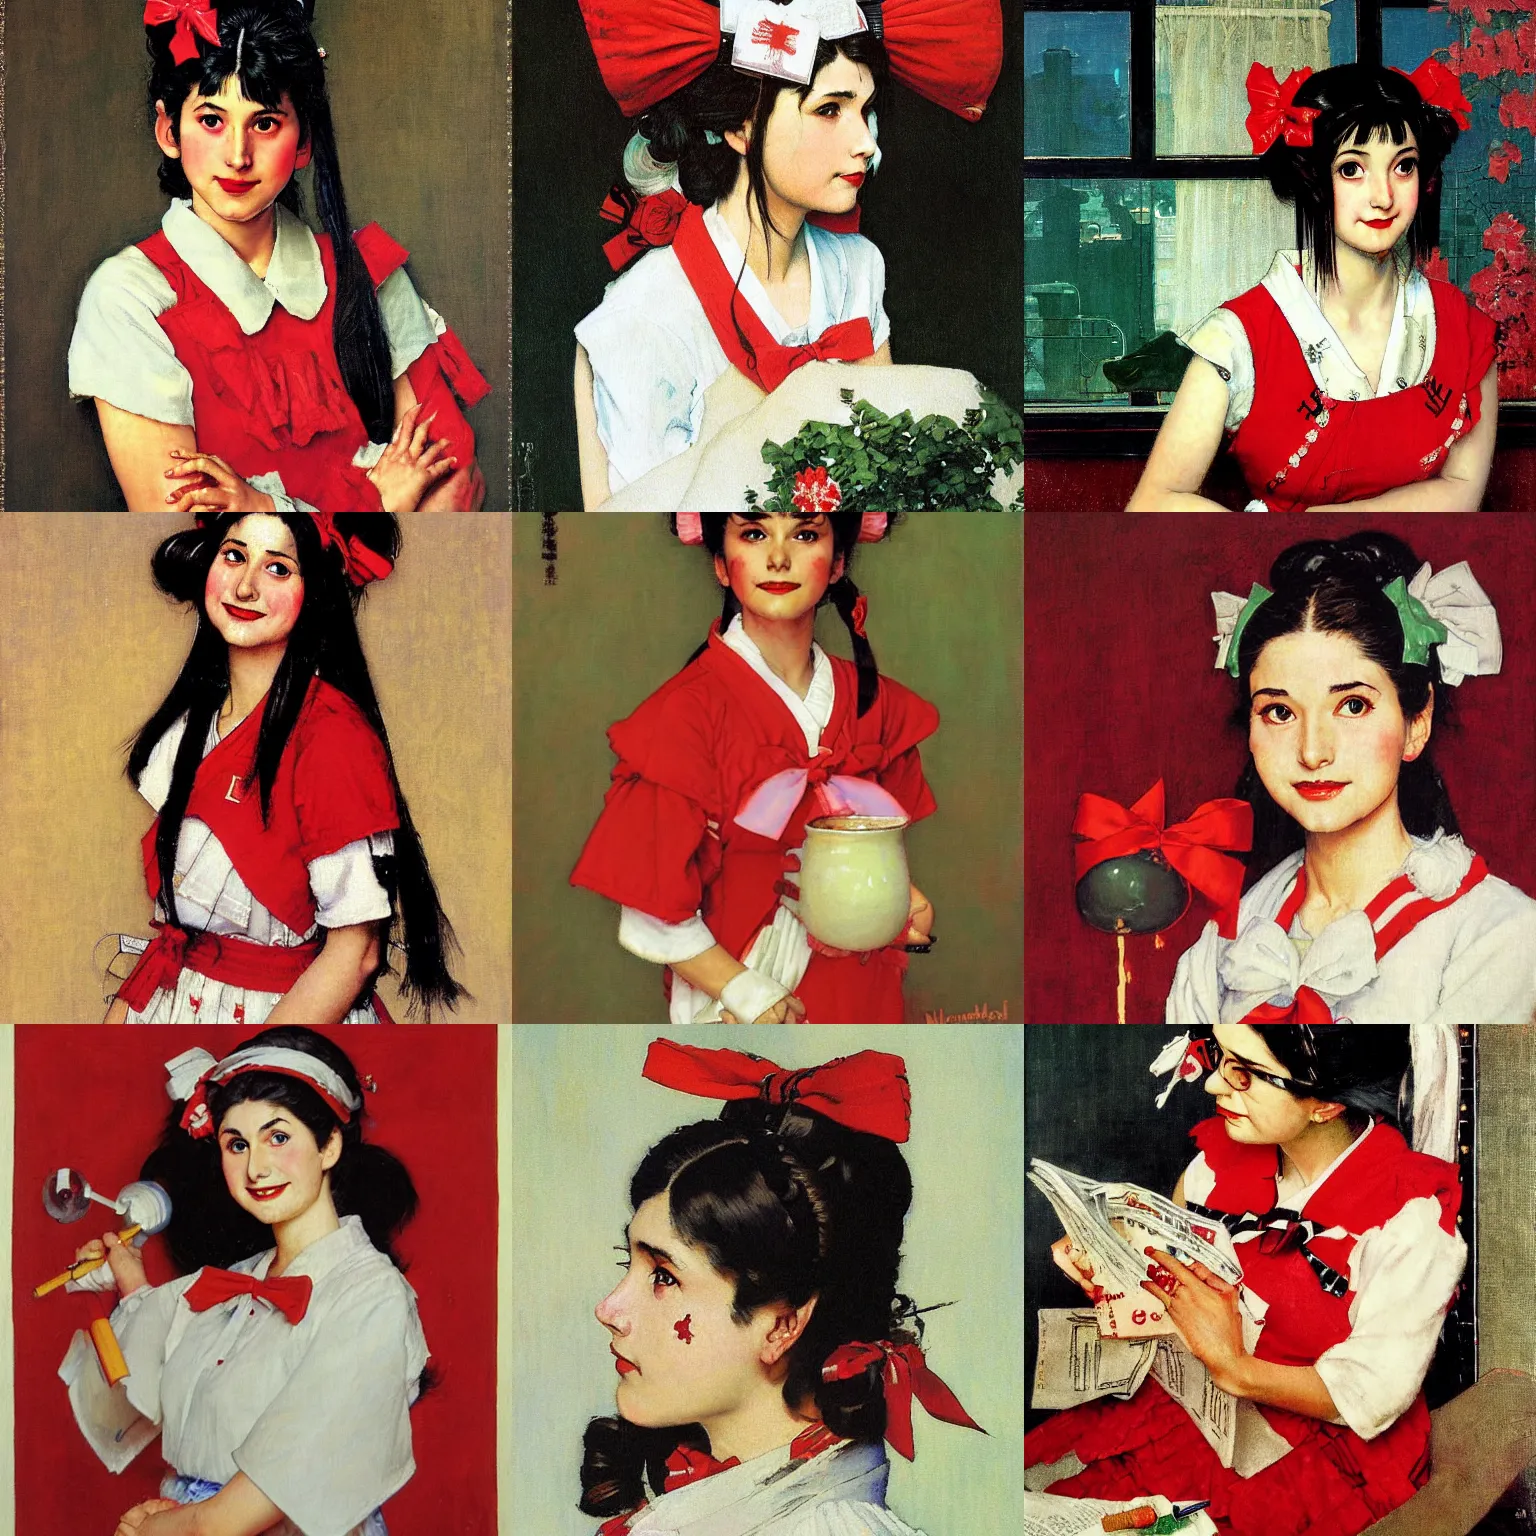 Prompt: a masterpiece portrait painting of reimu hakurei, by norman rockwell